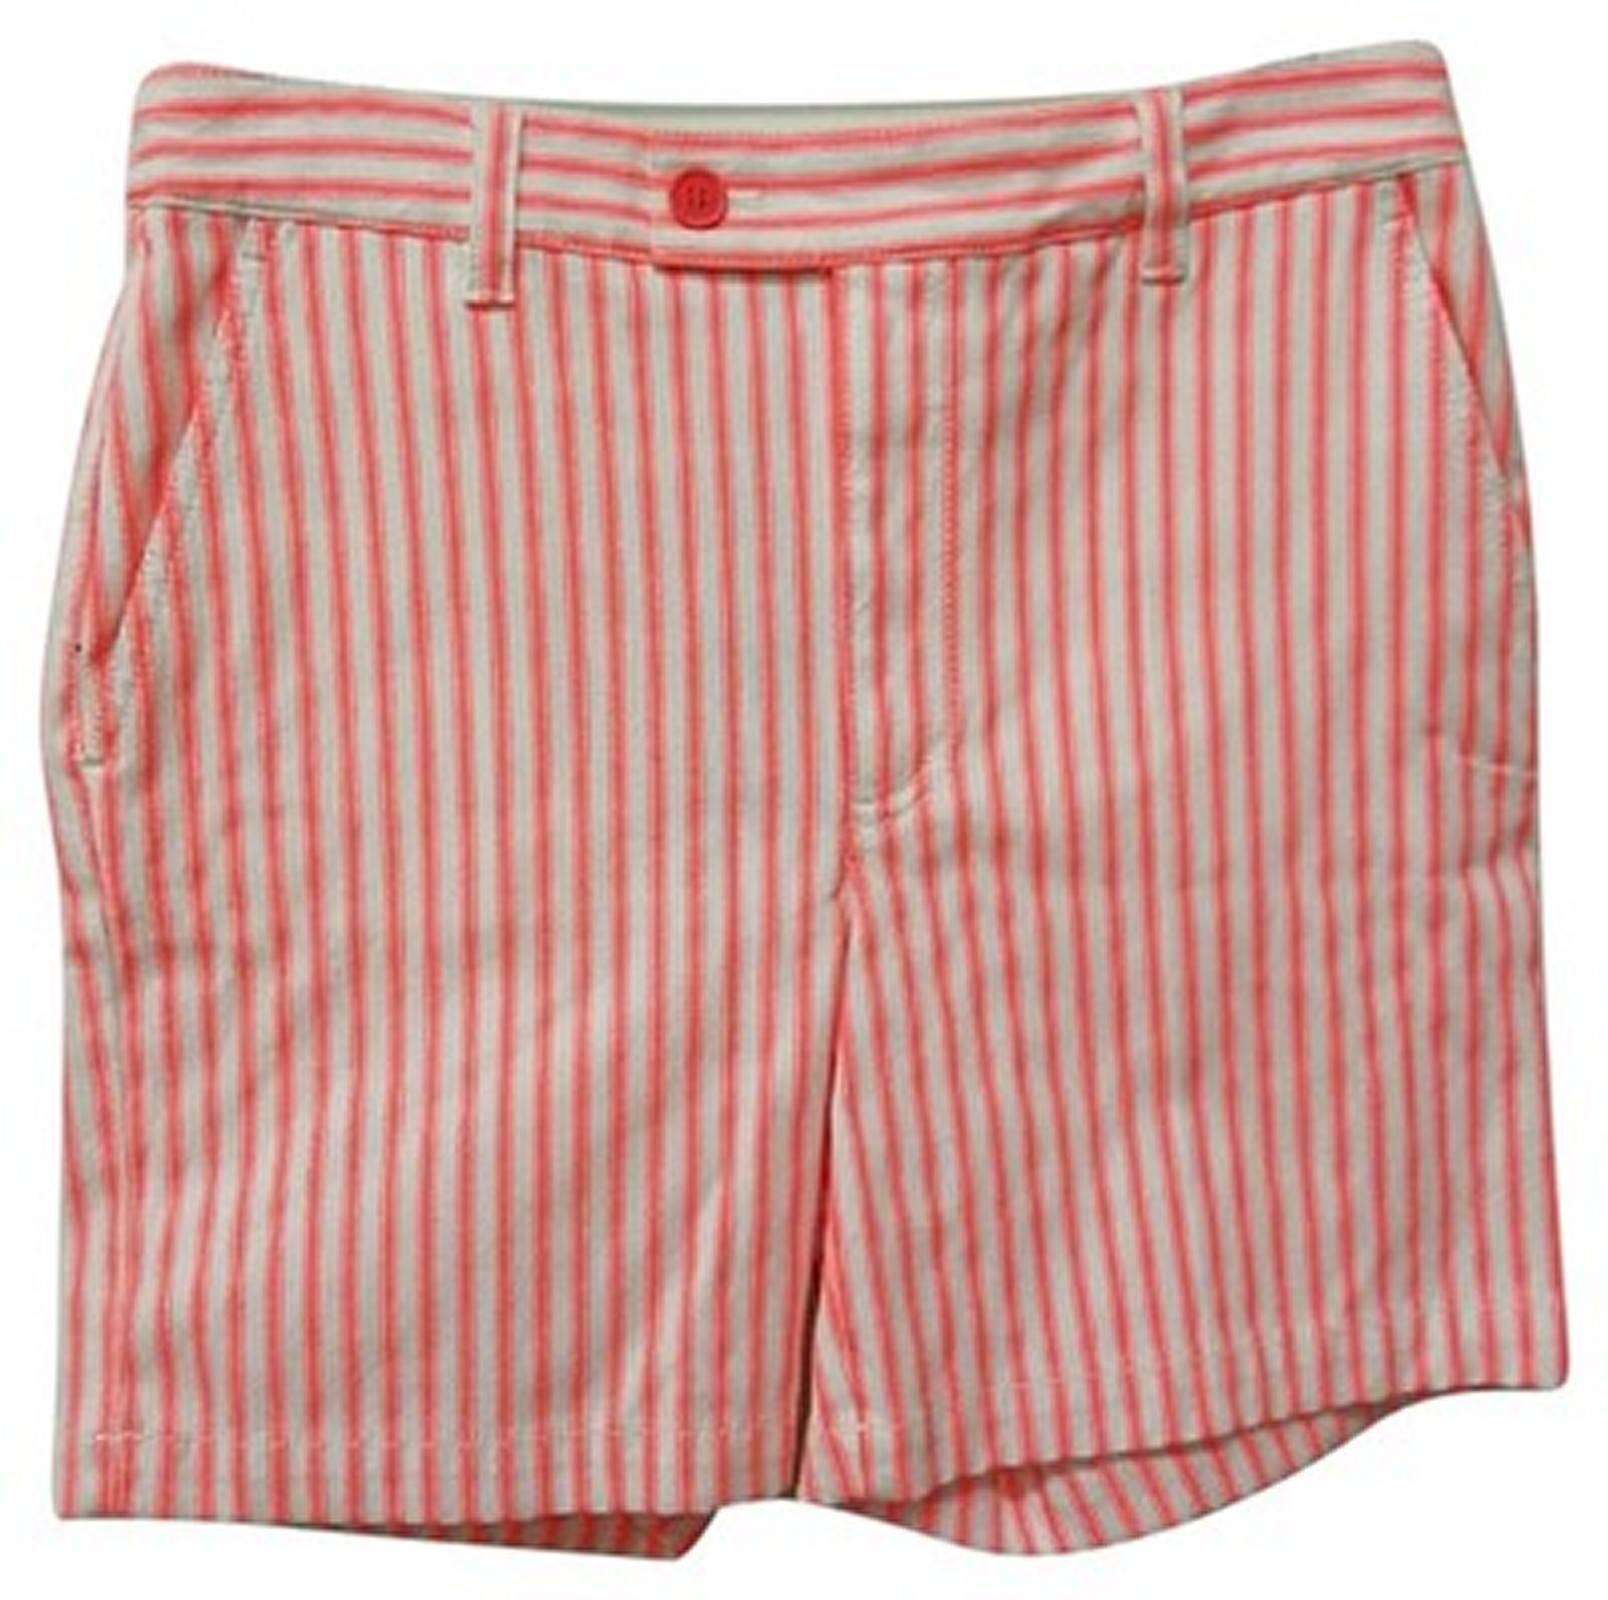 Marc by Marc Jacobs Striped Shorts - Size: 4 (S, 27) For Sale